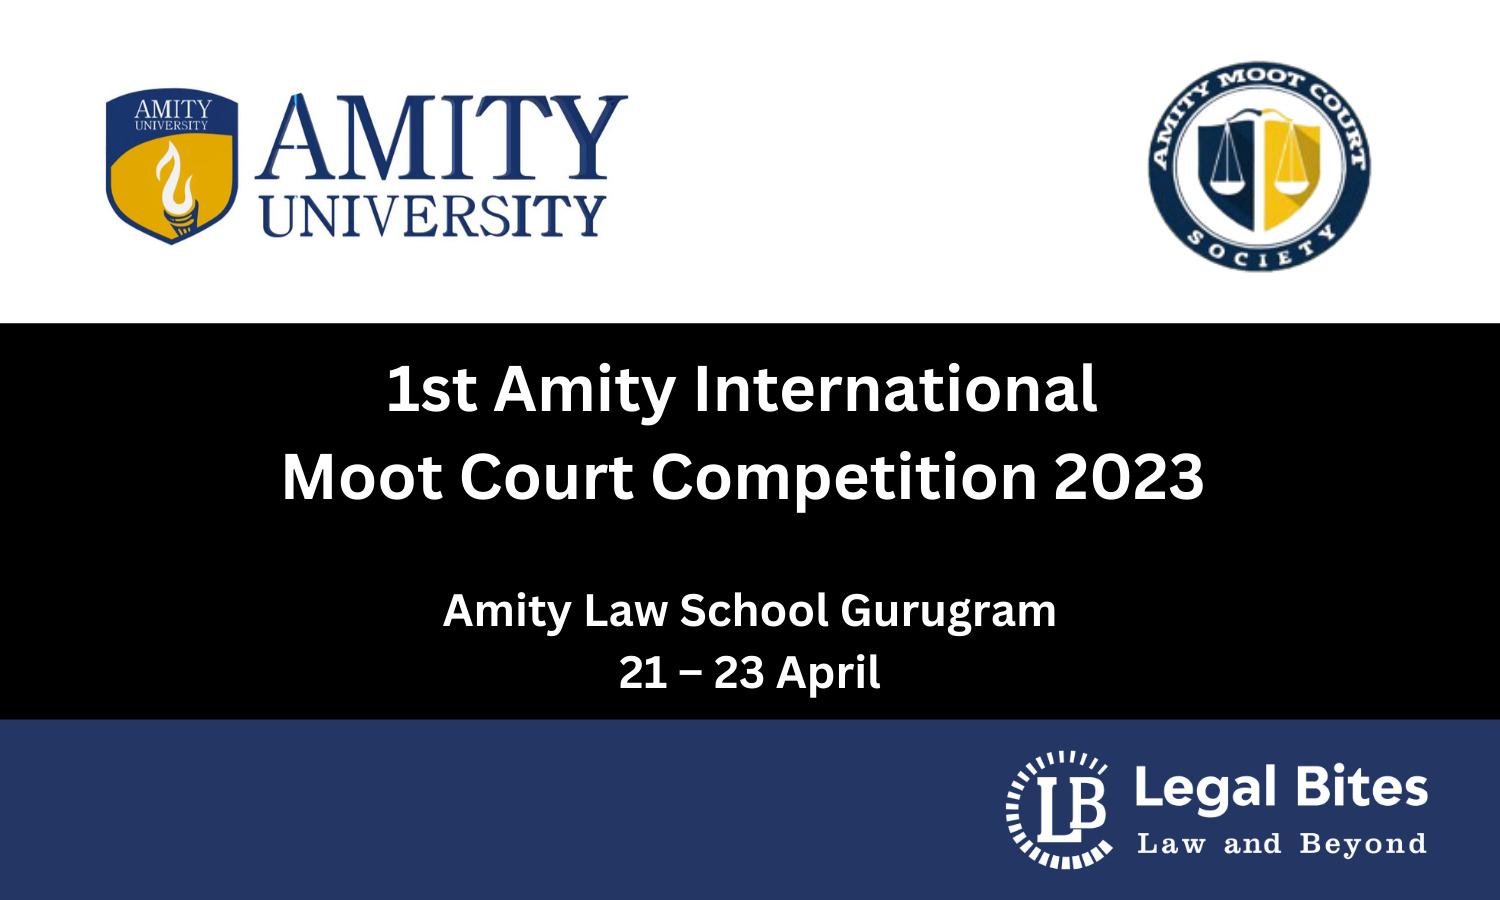 1st Amity International Moot Court Competition 2023 Amity Law School